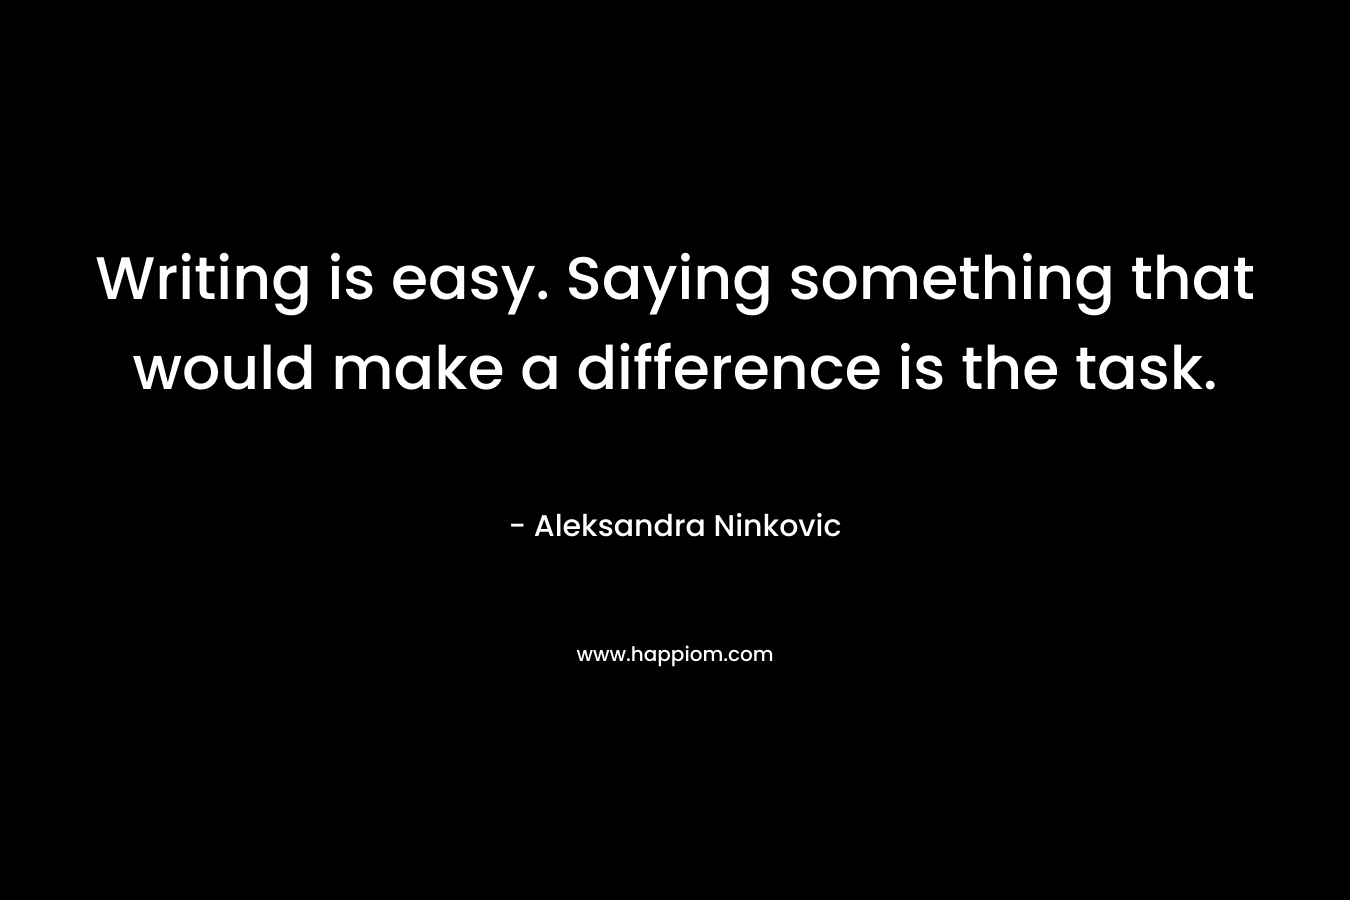 Writing is easy. Saying something that would make a difference is the task. – Aleksandra Ninkovic